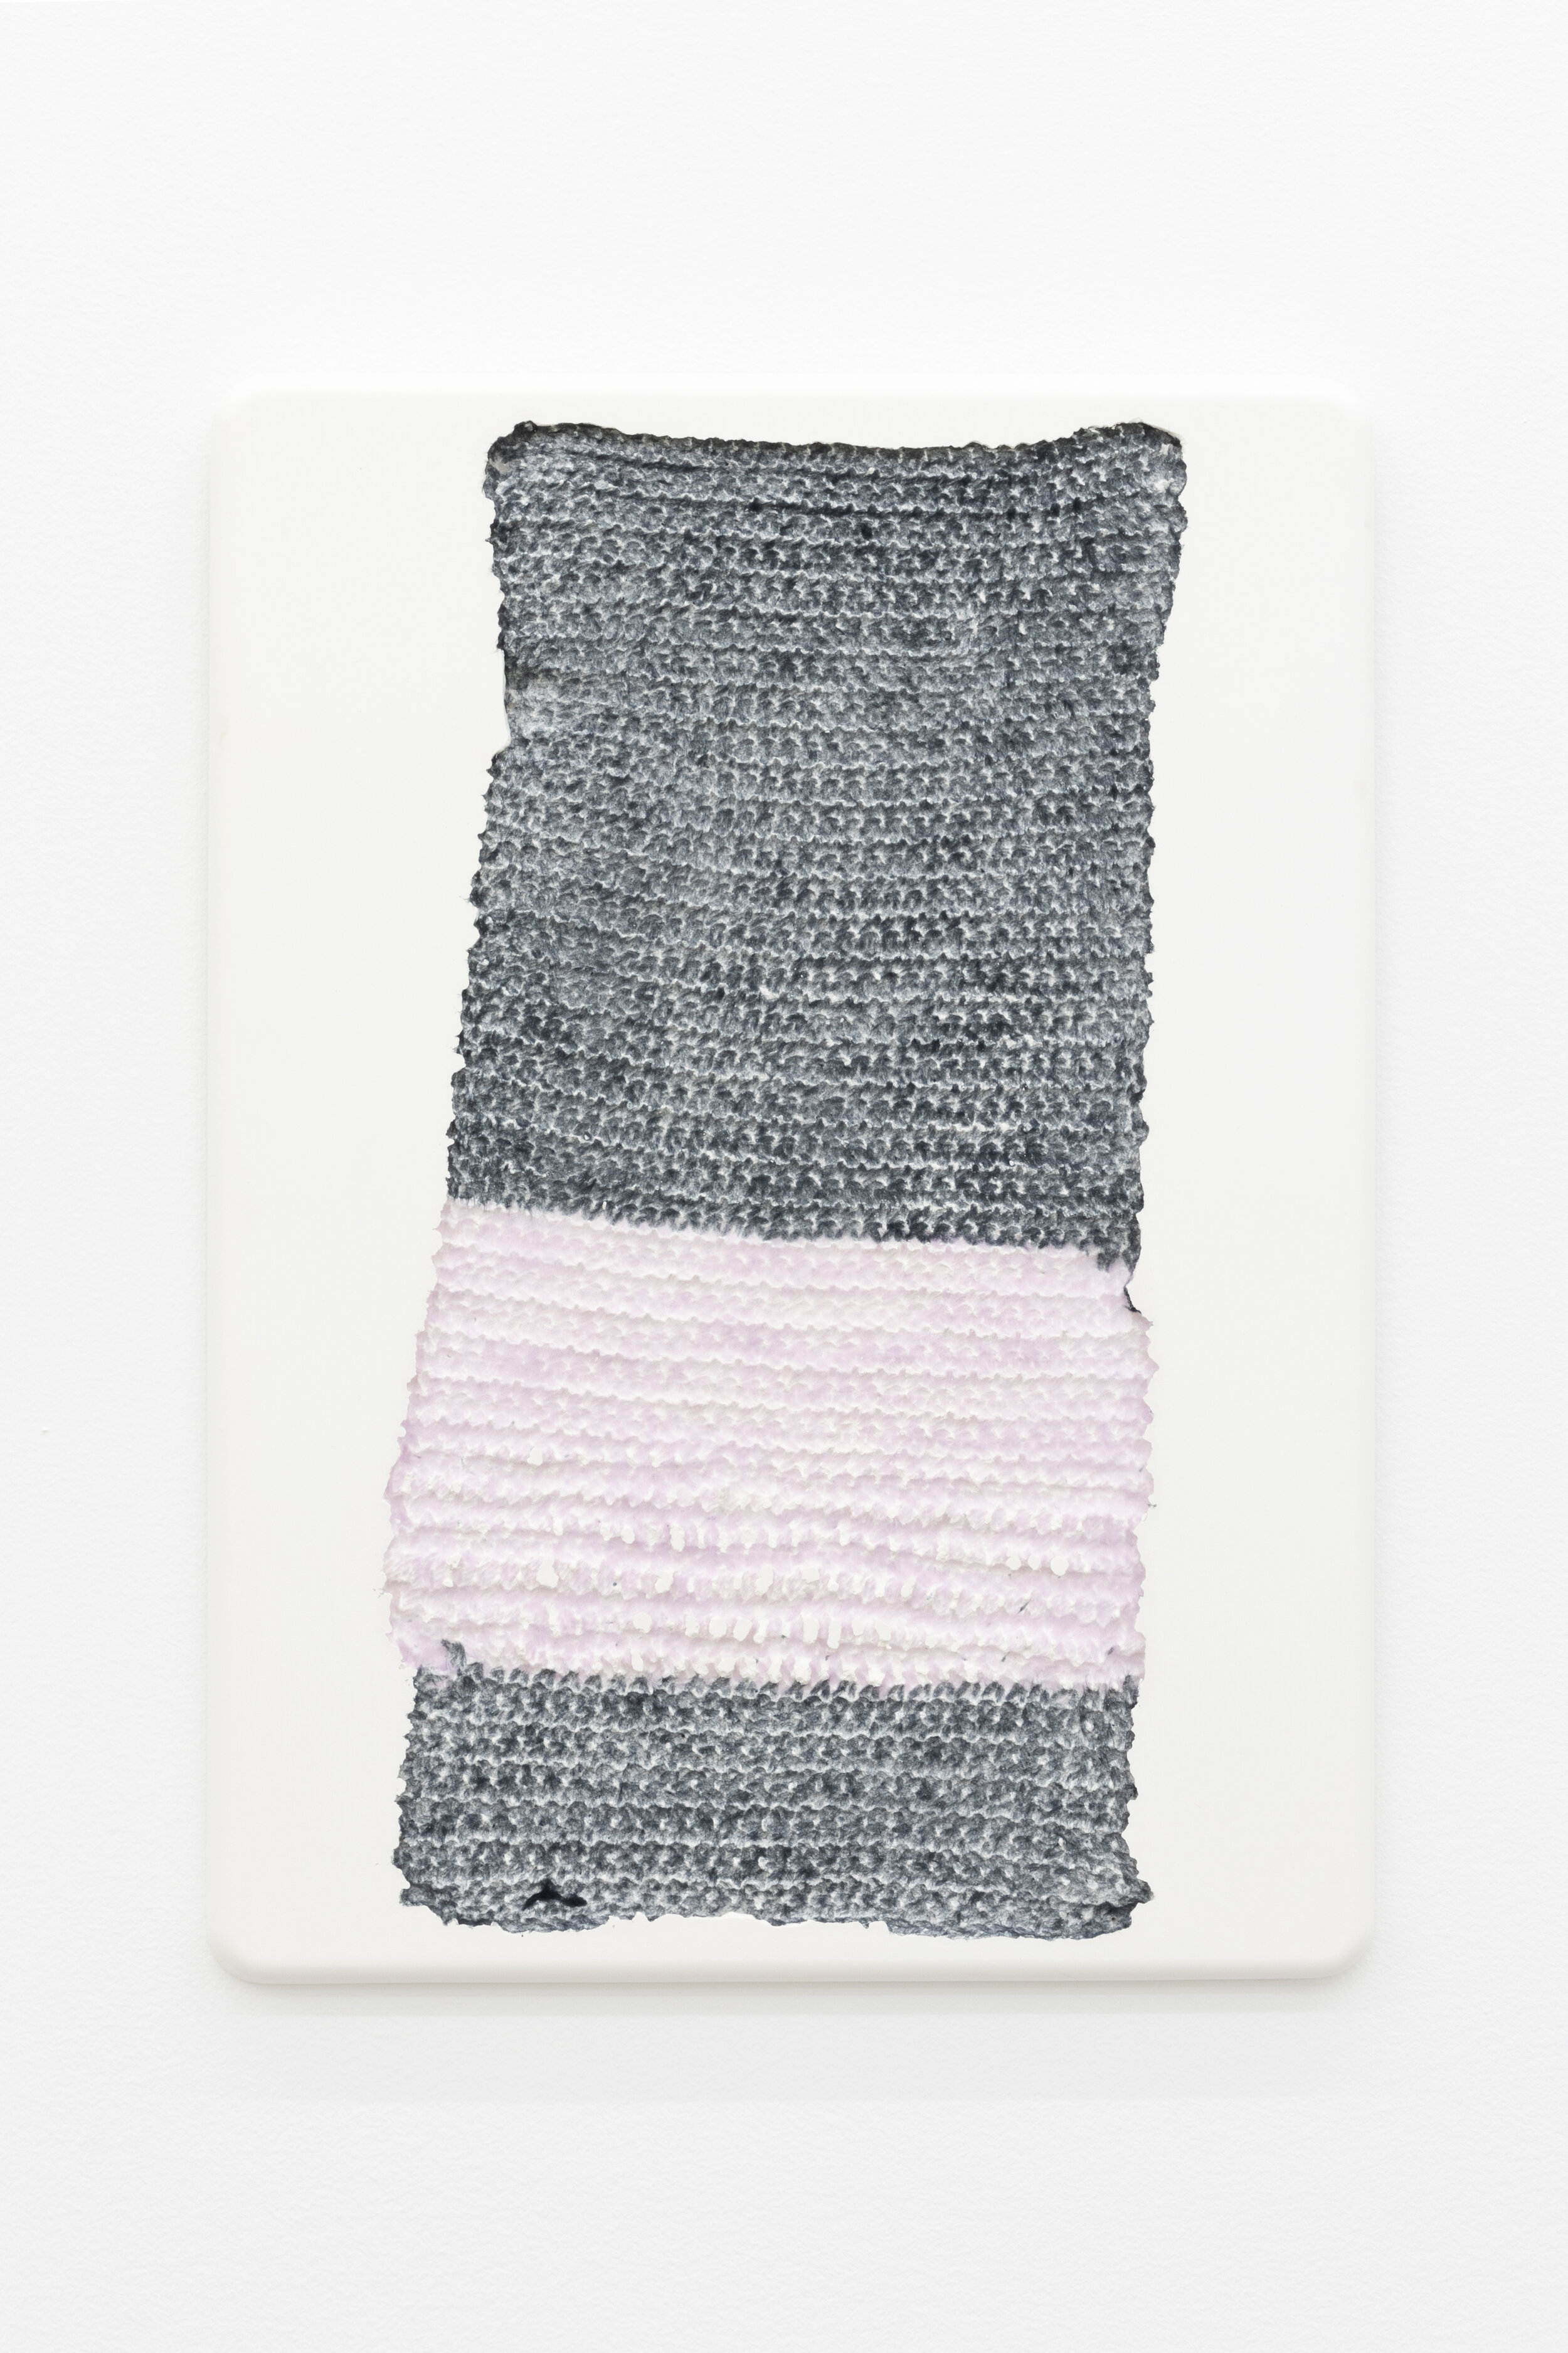  Michelle Grabner   Untitled , 2020  plaster cast with dyed cotton fibers  20 x 15 in. 